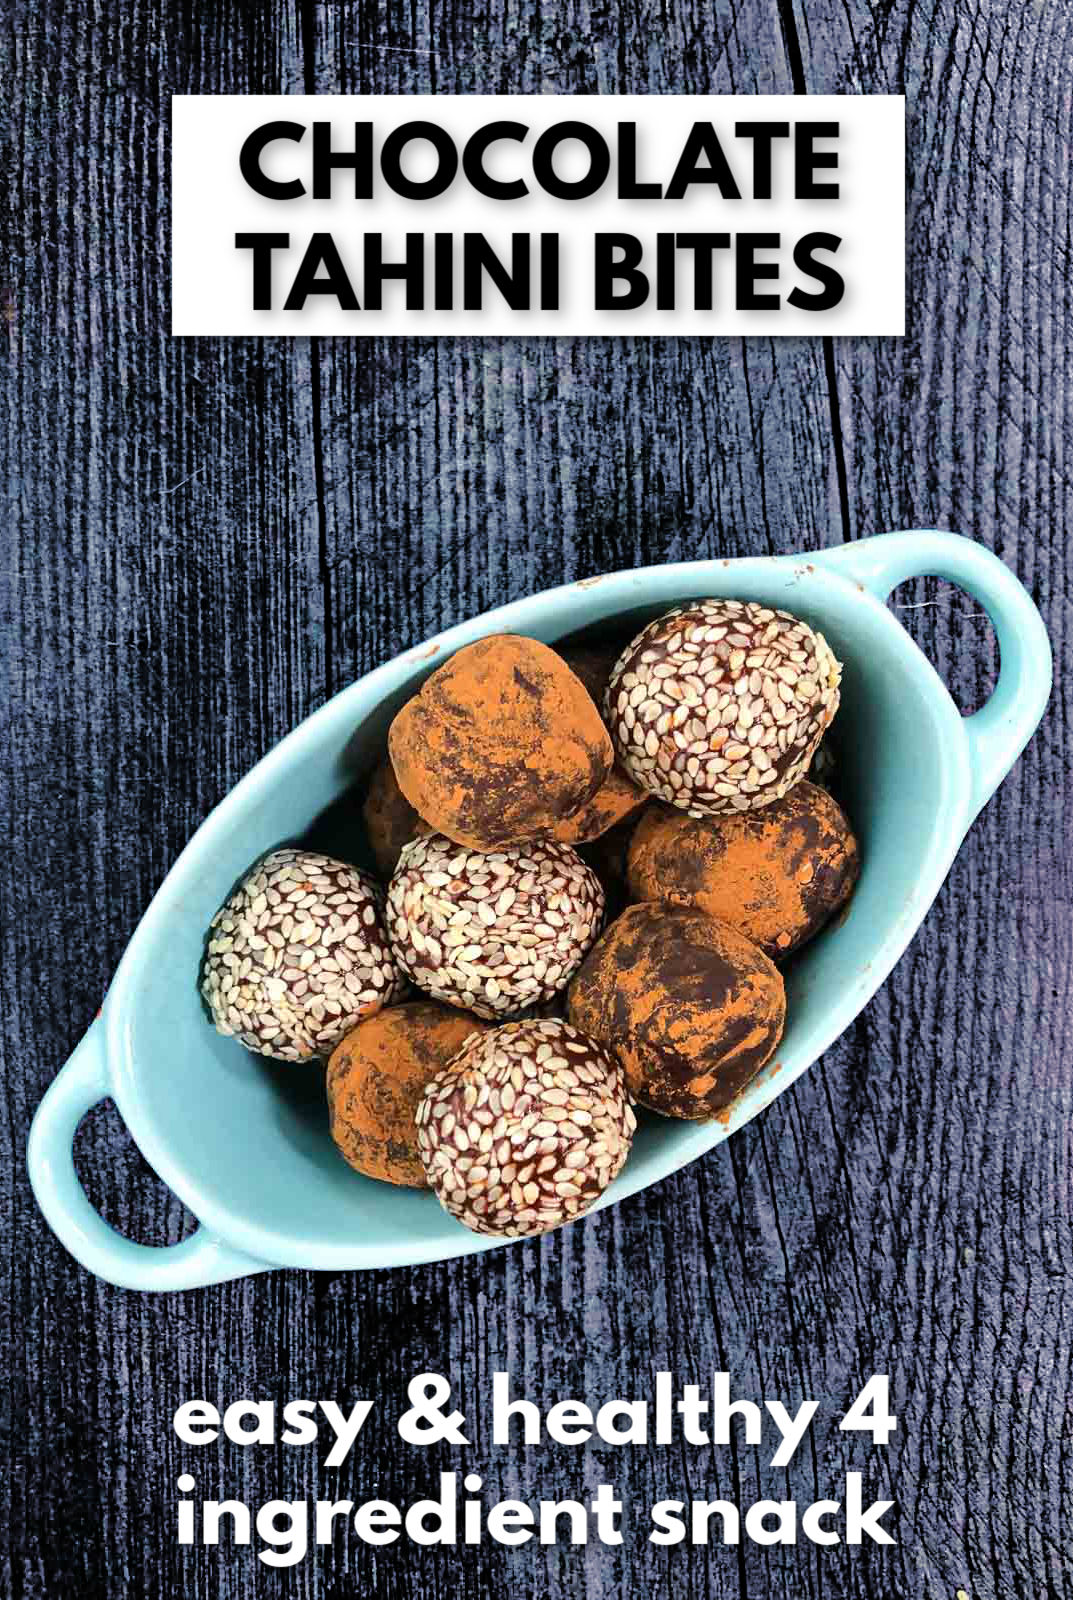 sesame covered chocolate tahini bites in a blue dish with text